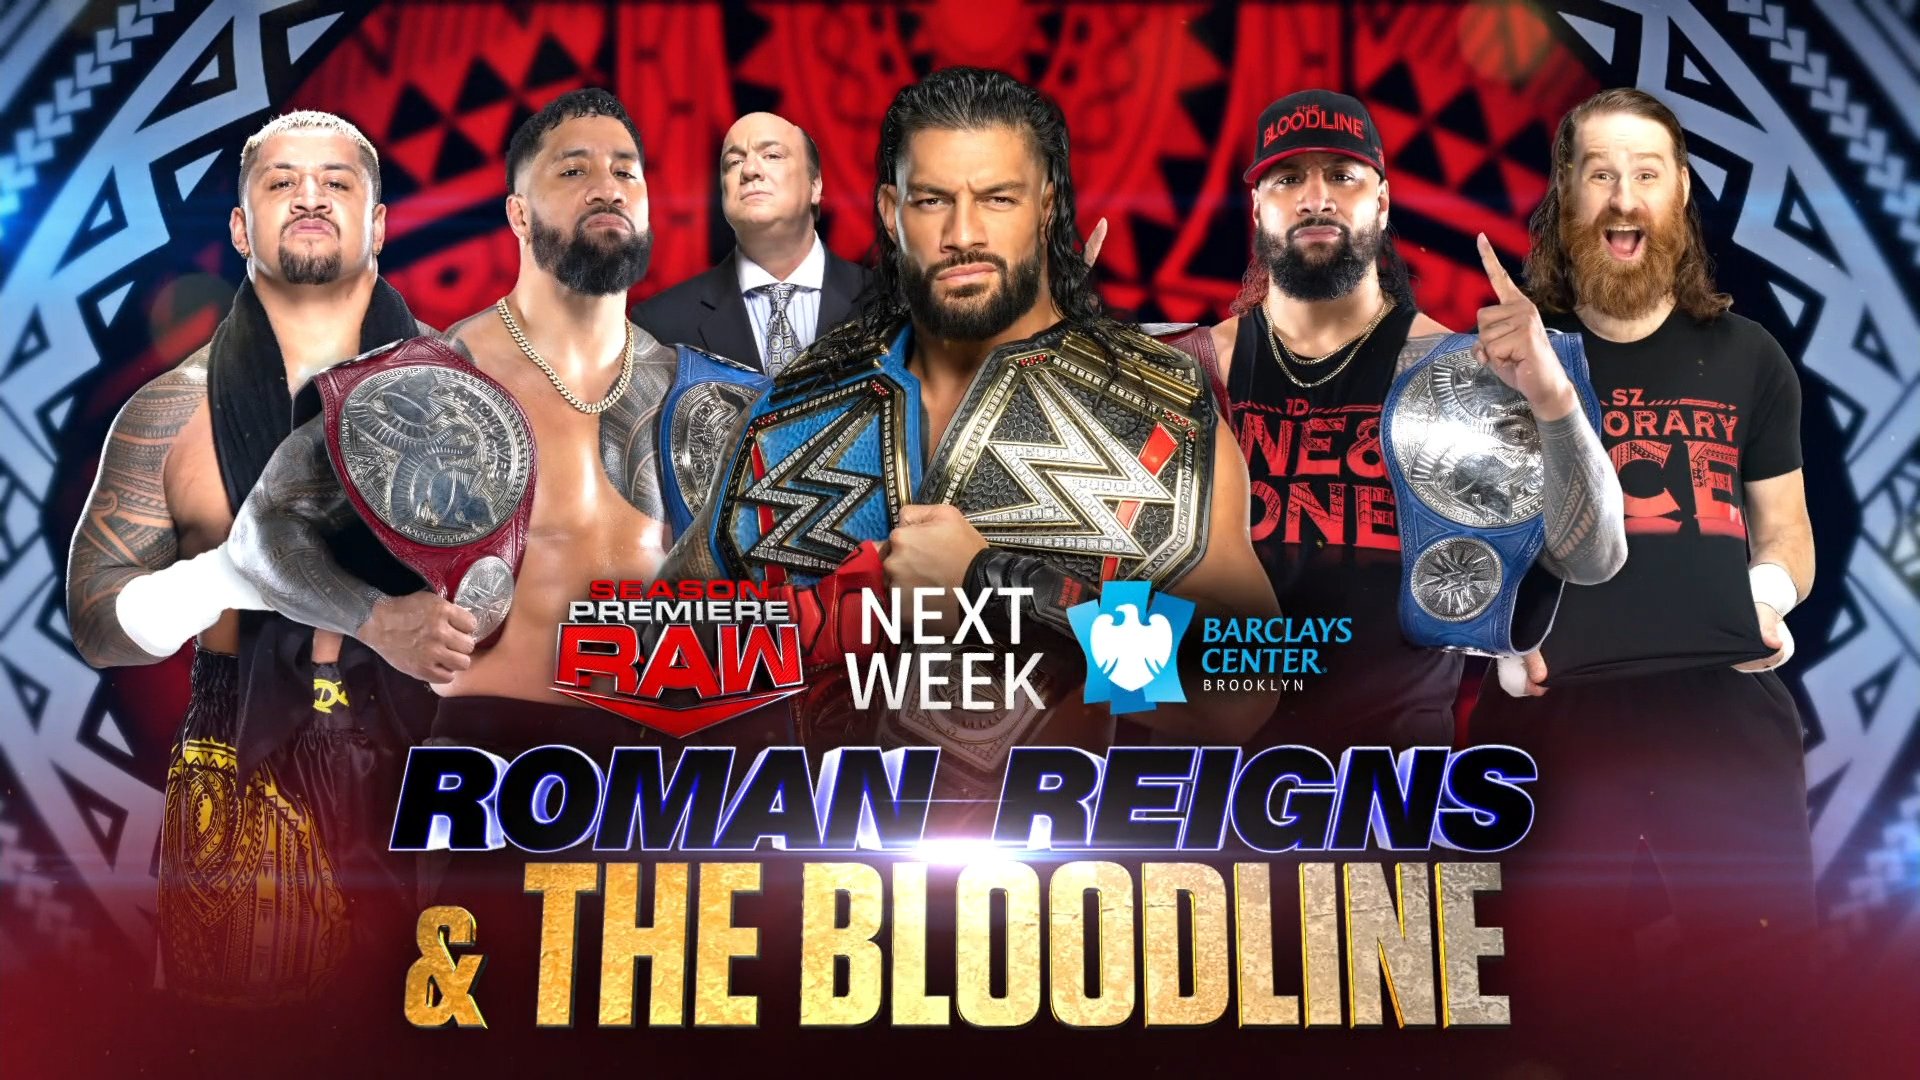 WWE Raw 2022 Season Premiere: The Bloodline To Appear; Title Match Confirmed